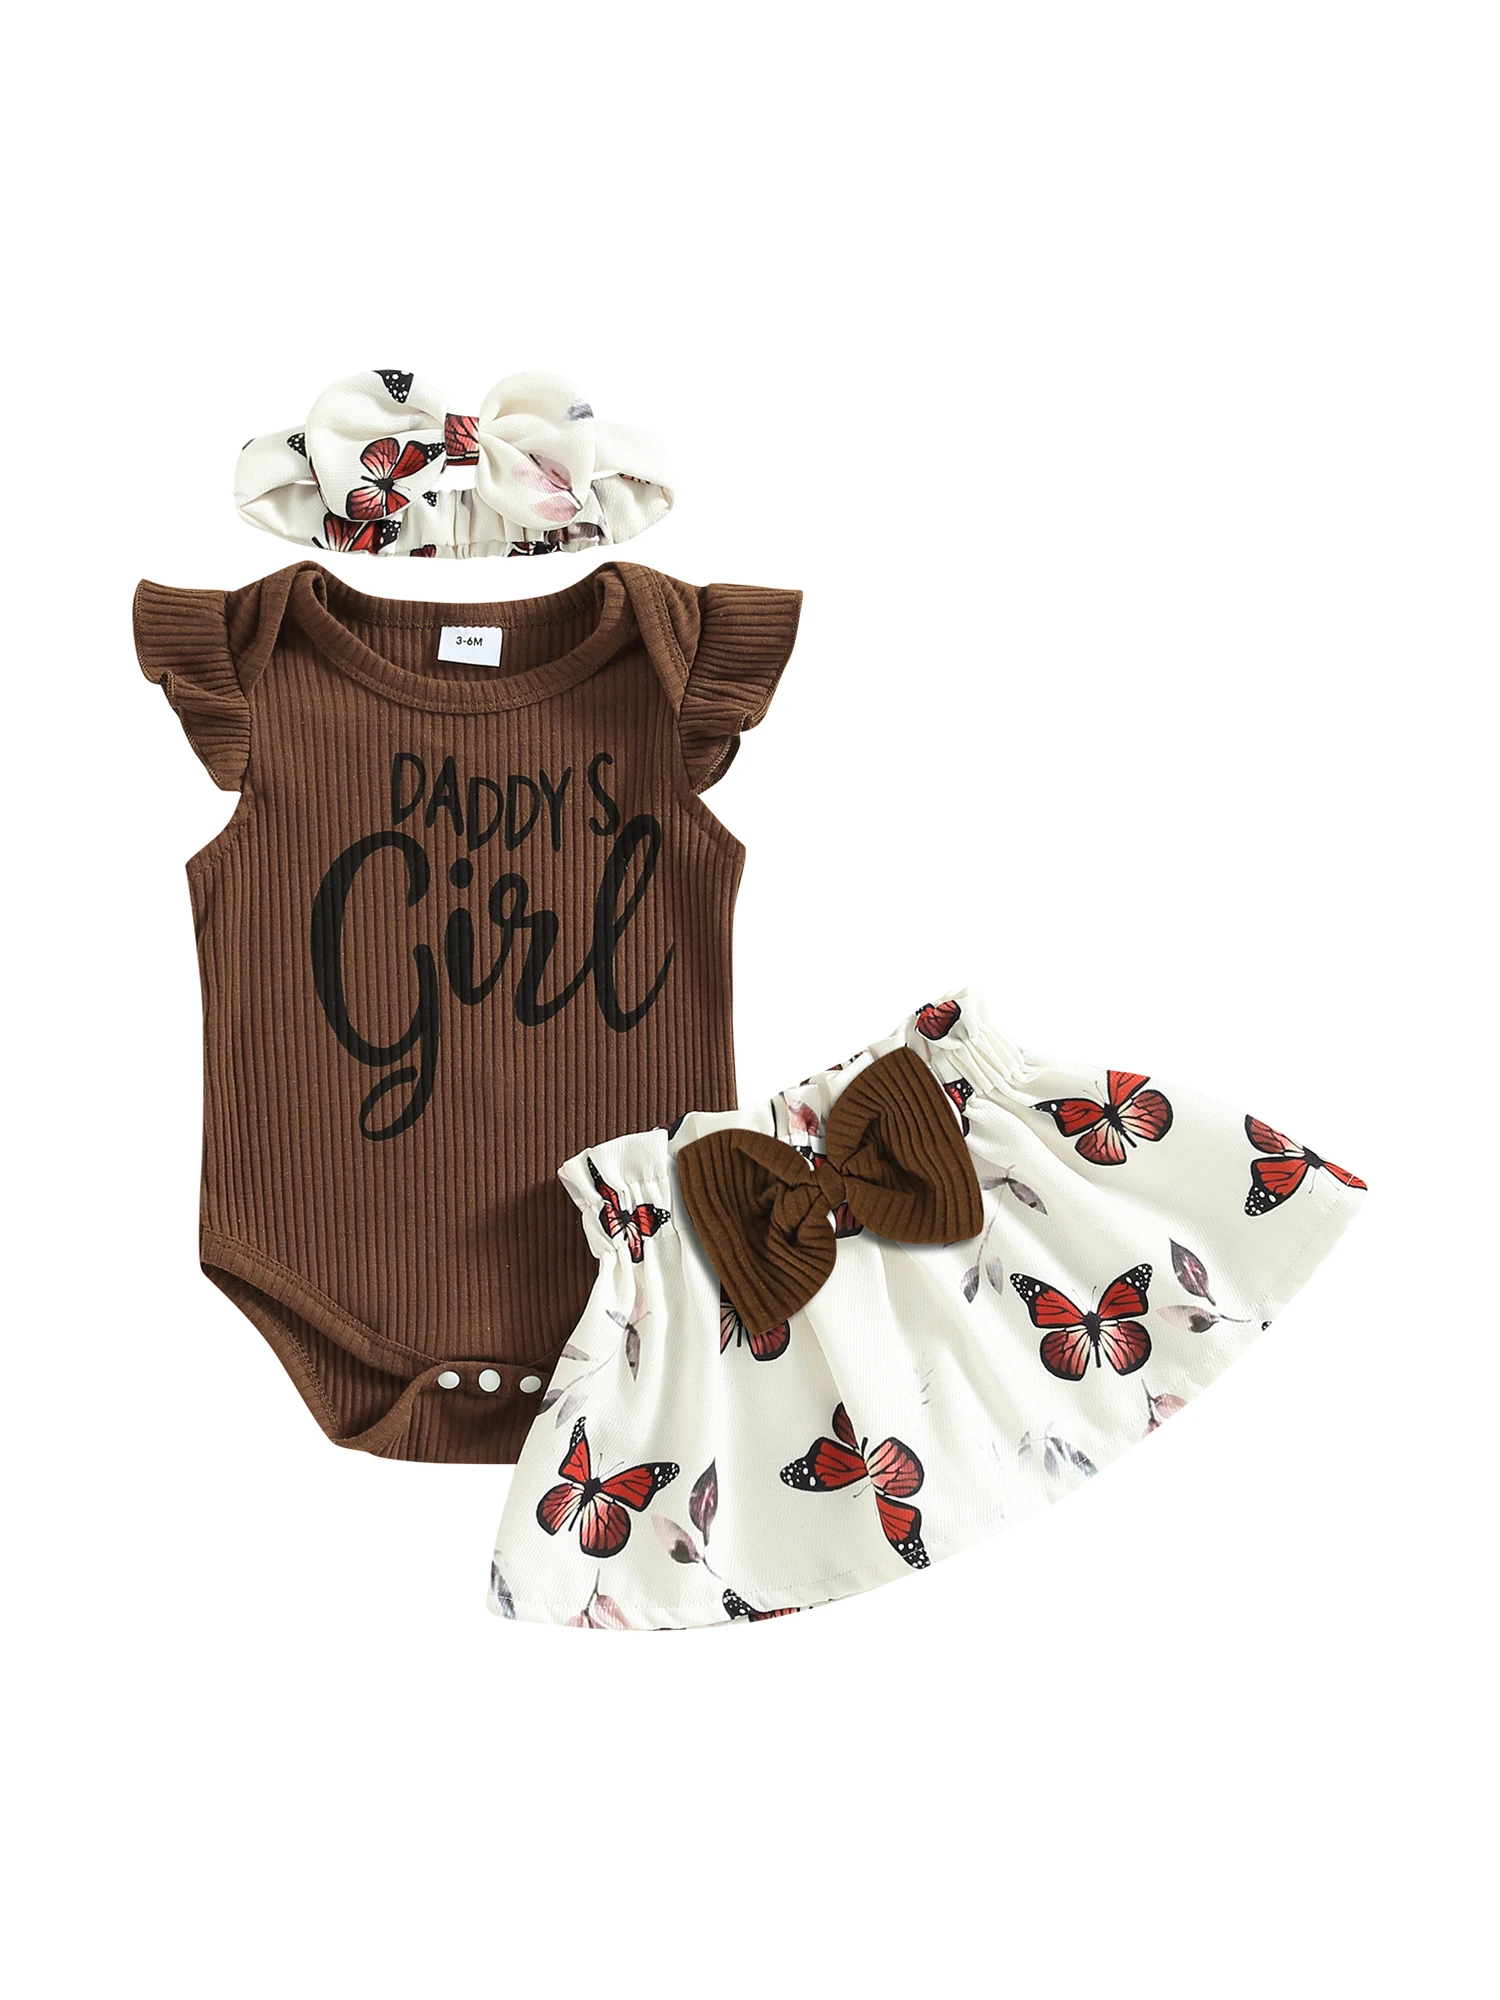 

Adorable Baby Girl Outfit Set with Fly-Sleeve Romper Floral Skirt and Headband for a Stylish Summer Look - Perfect for